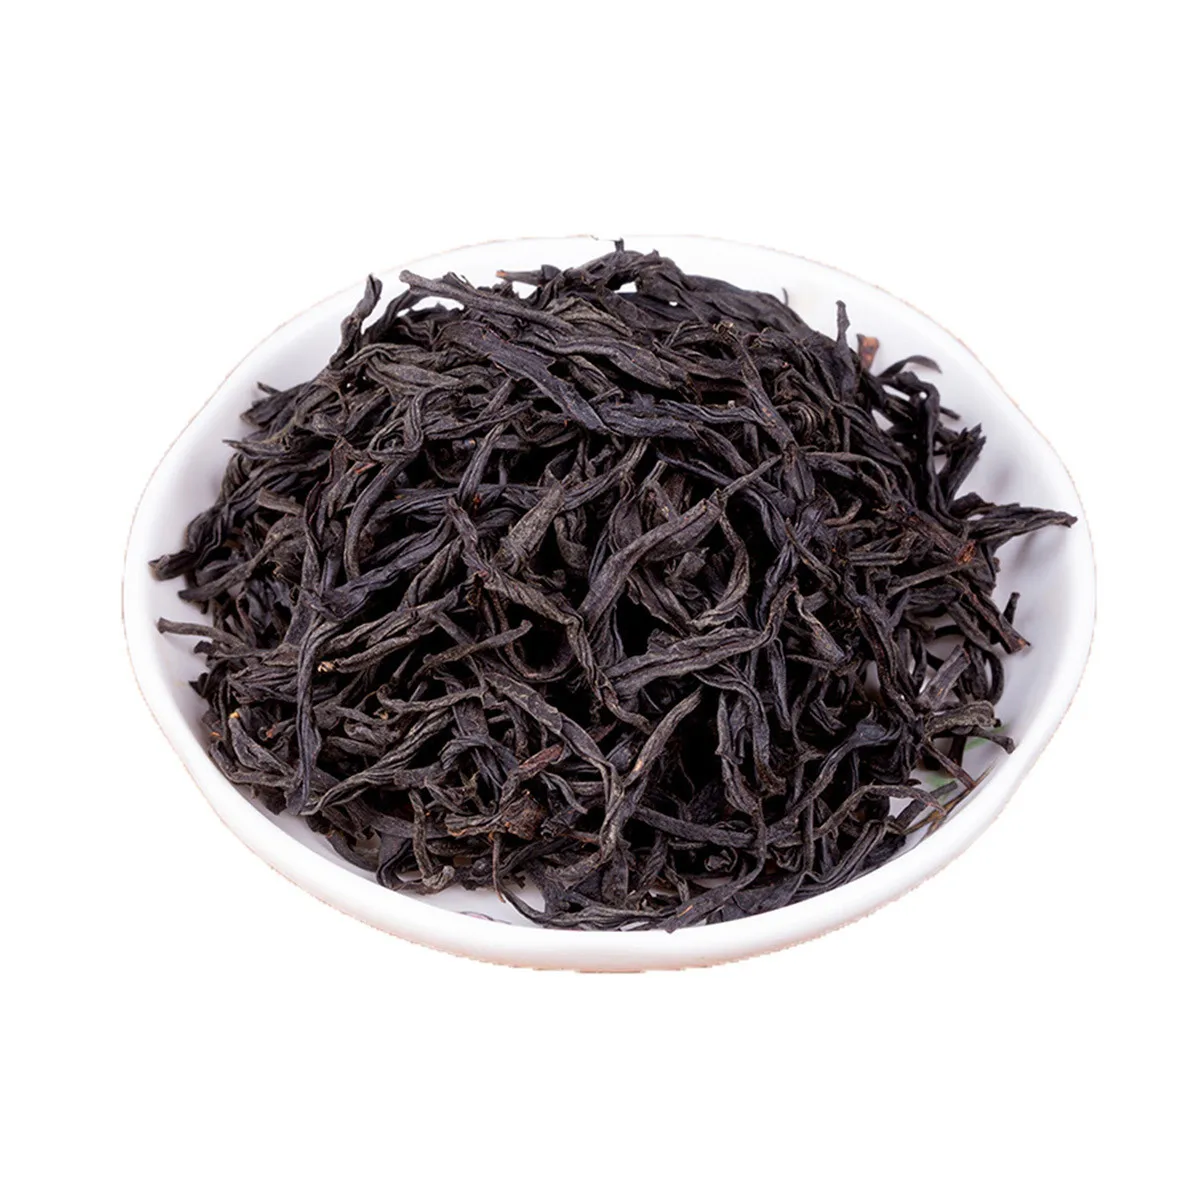 

Organic Smoky Lapsang Souchong Top Smoked China Black Tea Health Care New Cooked Tea Factory Direct Sales50g